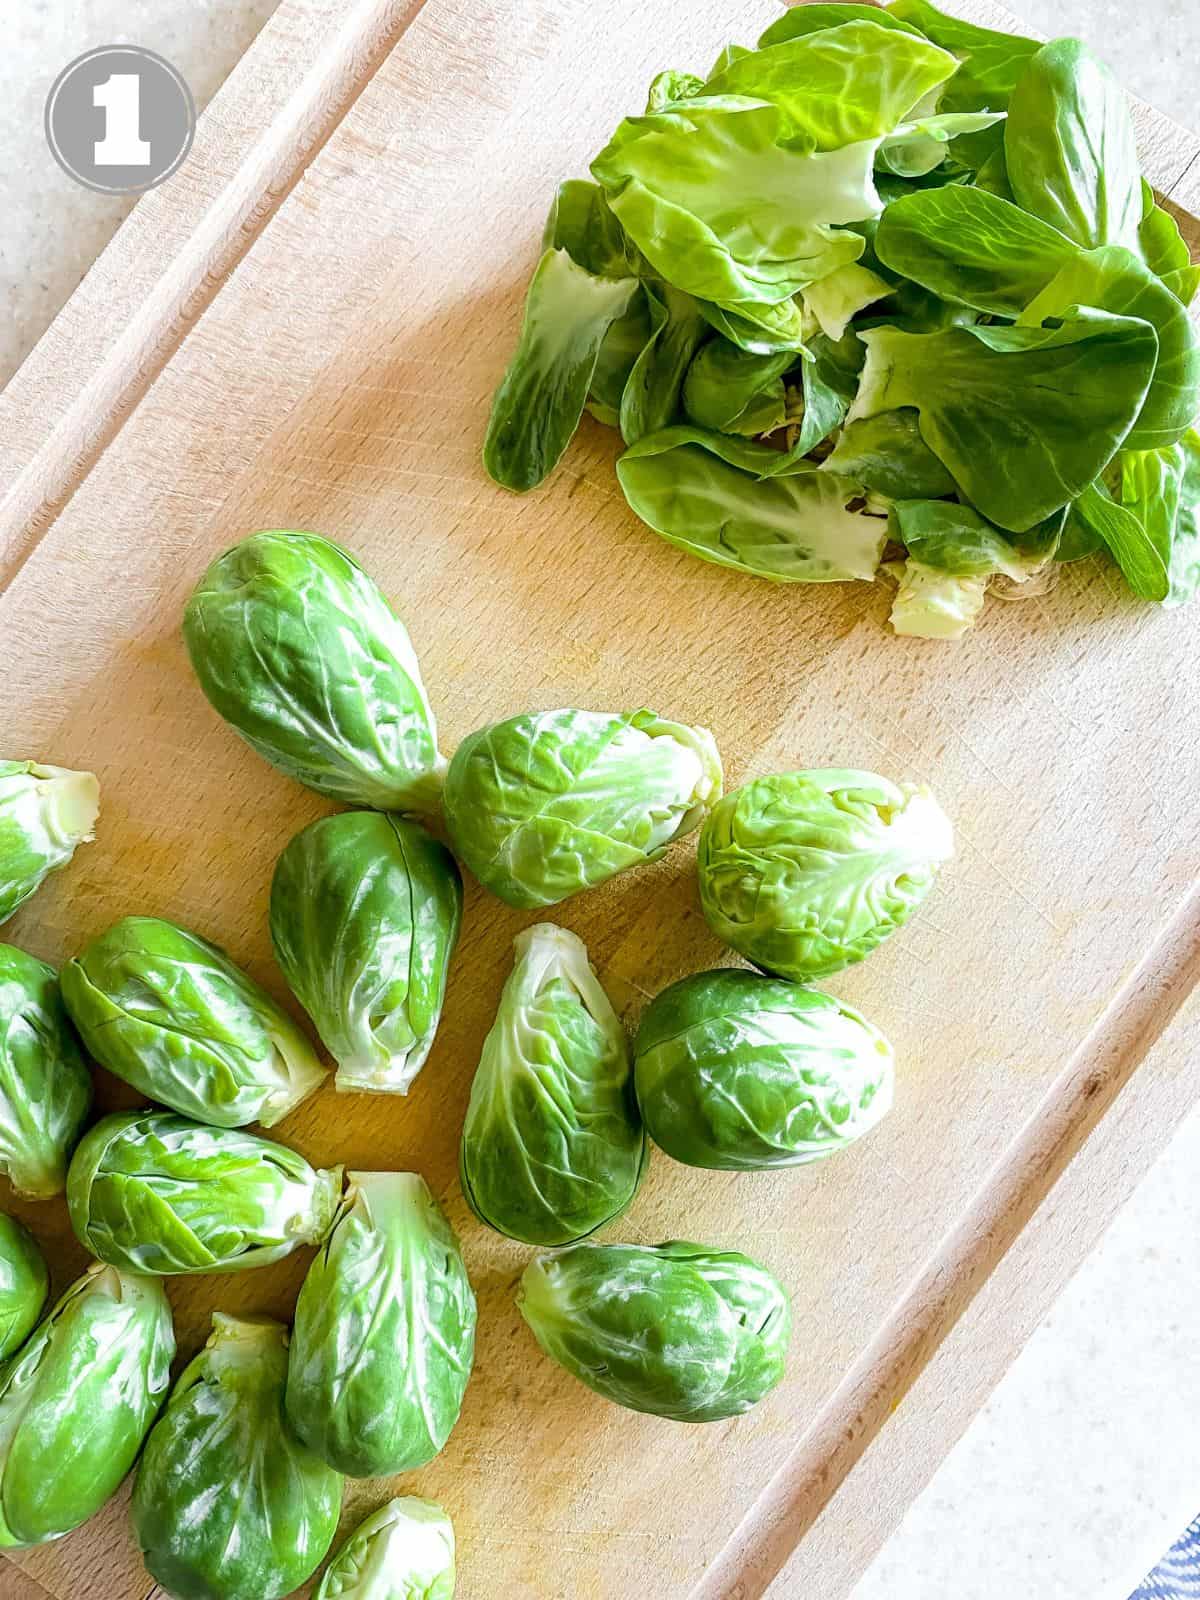 peeled Brussels sprouts next to sprout leaves on a wooden board labelled number one.